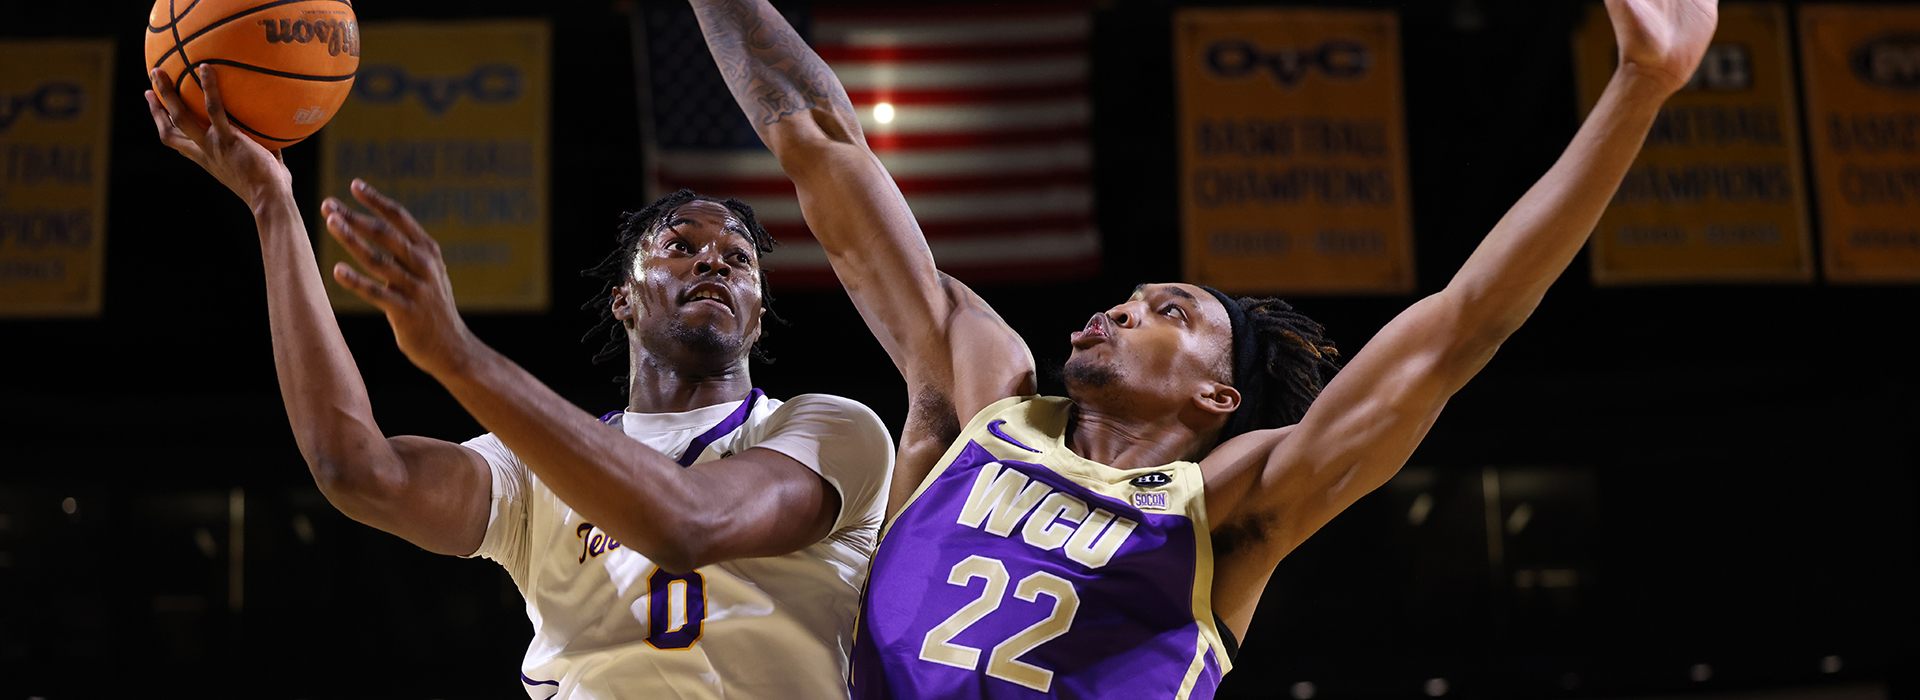 Golden Eagles fall to red-hot Catamounts in down-to-wire finish